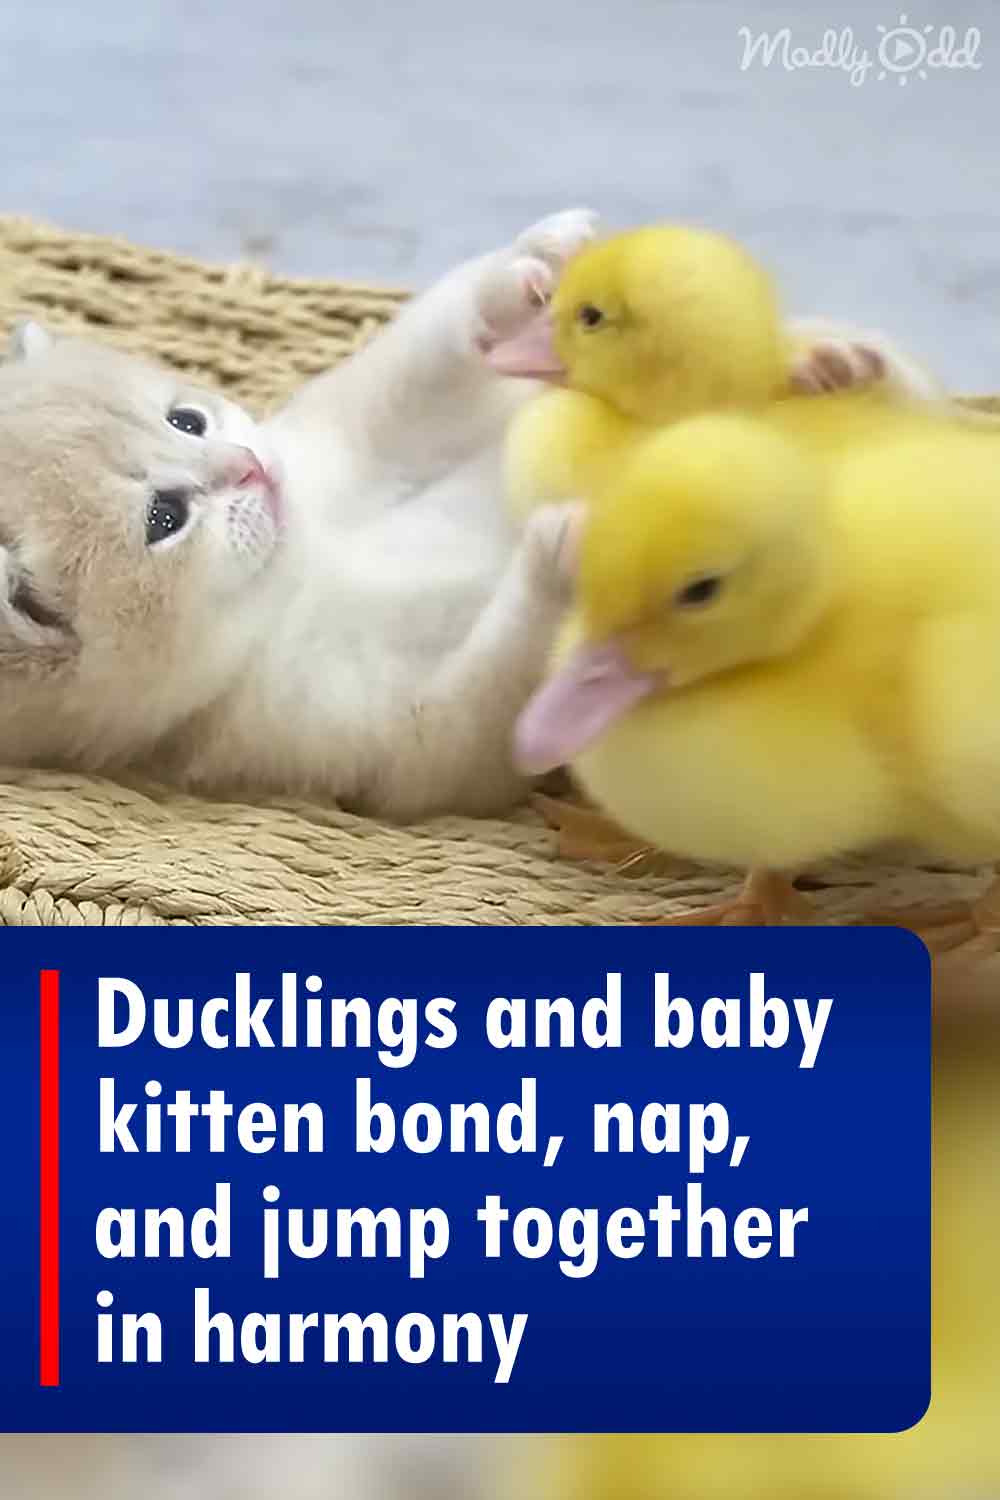 Ducklings and baby kitten bond, nap, and jump together in harmony